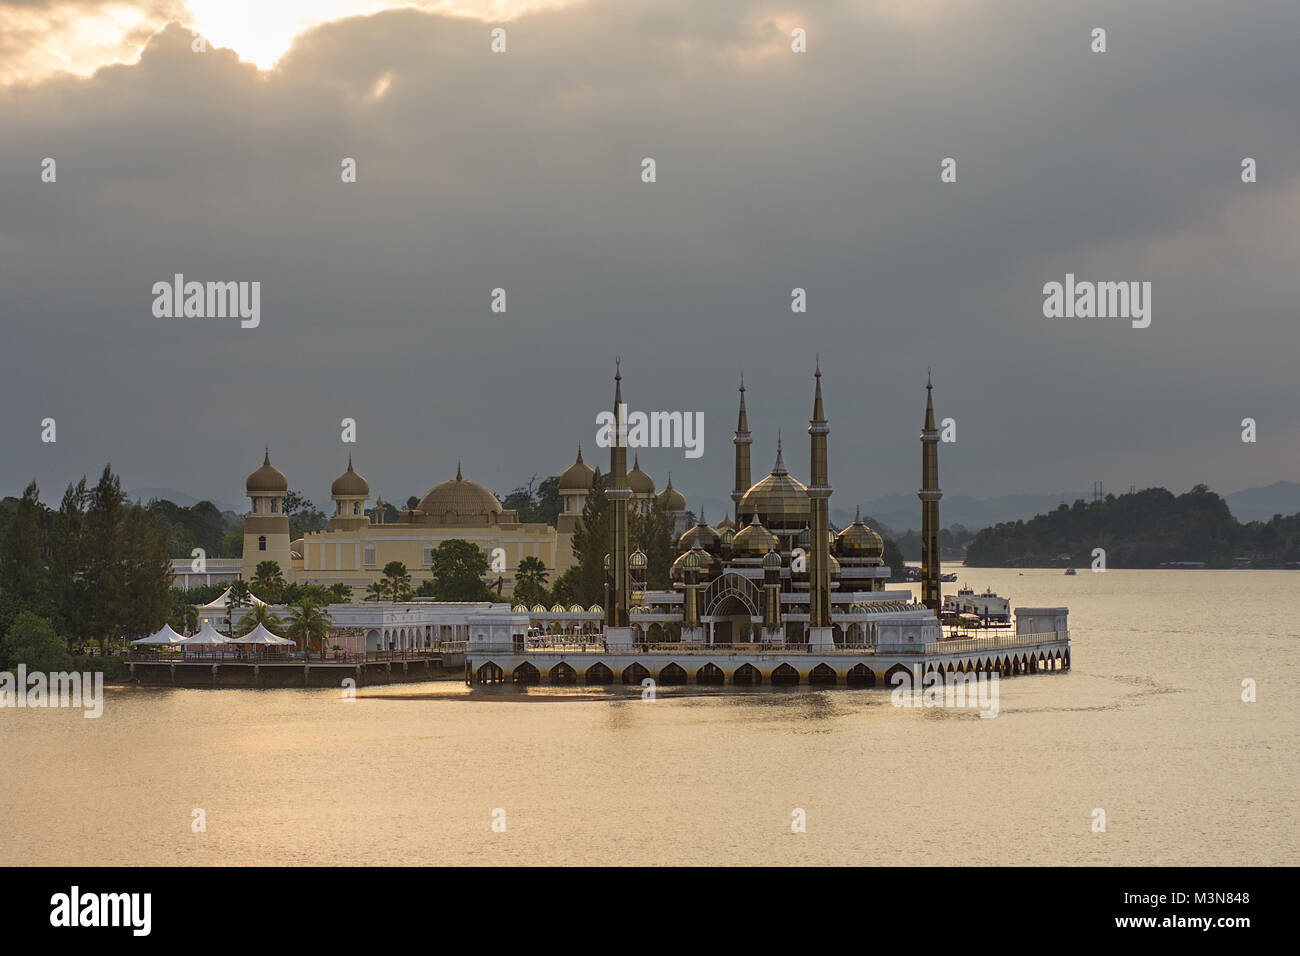 The floating Crystal Mosque or Masjid Kristal in Kuala Terengganu, Malaysia in the river just off of a man made island. Stock Photo